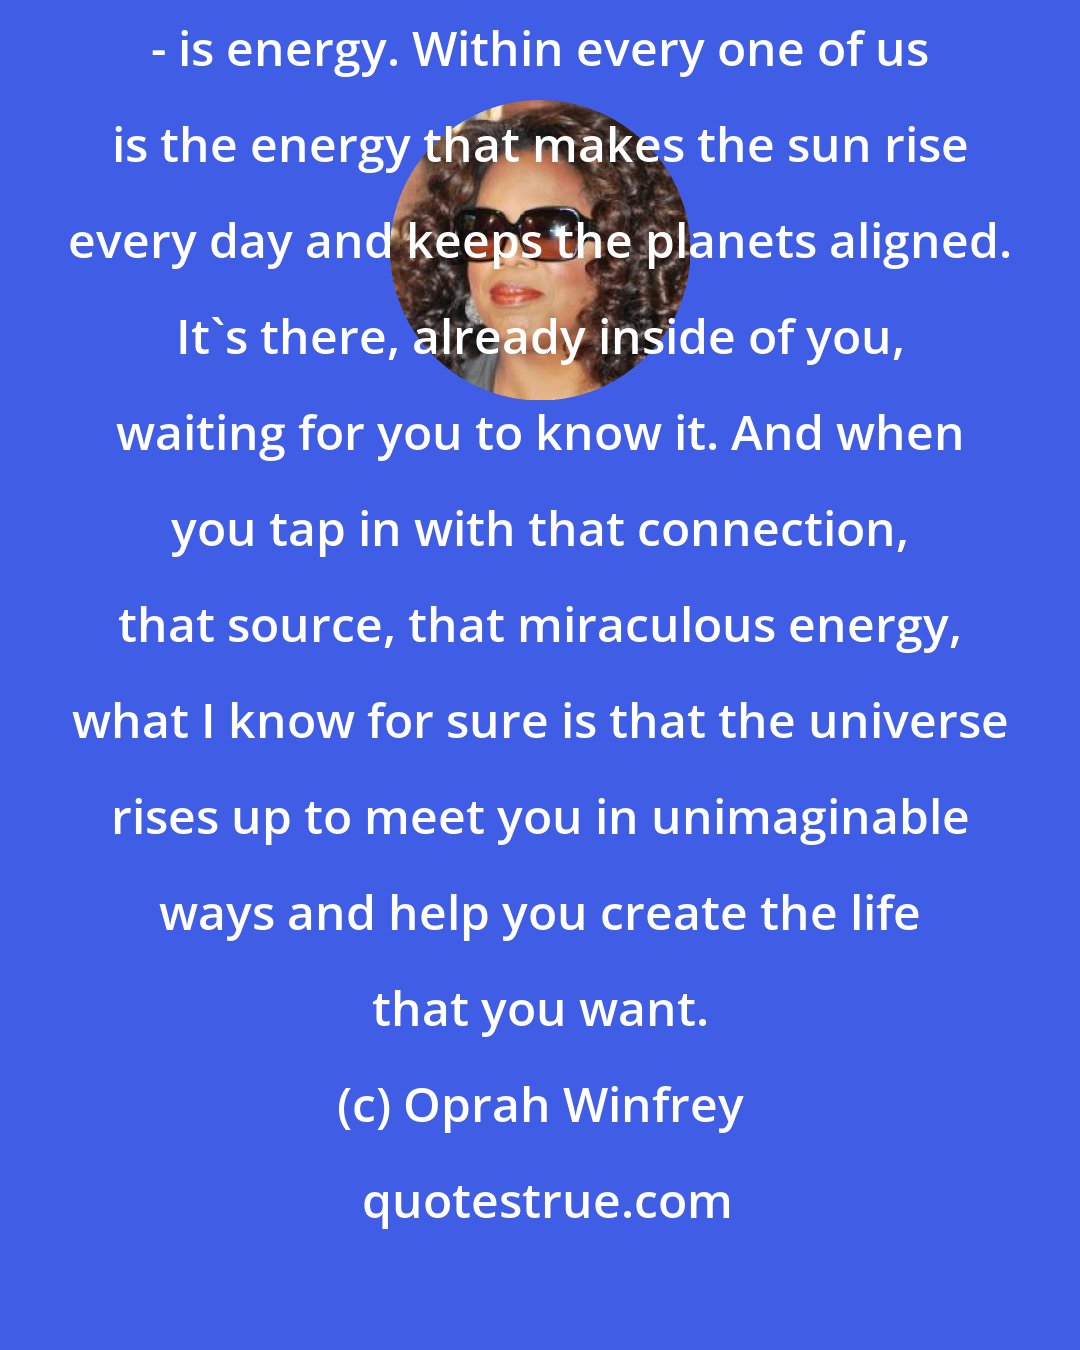 Oprah Winfrey: One of the truths I most deeply believe is that everything in life - everything - is energy. Within every one of us is the energy that makes the sun rise every day and keeps the planets aligned. It's there, already inside of you, waiting for you to know it. And when you tap in with that connection, that source, that miraculous energy, what I know for sure is that the universe rises up to meet you in unimaginable ways and help you create the life that you want.